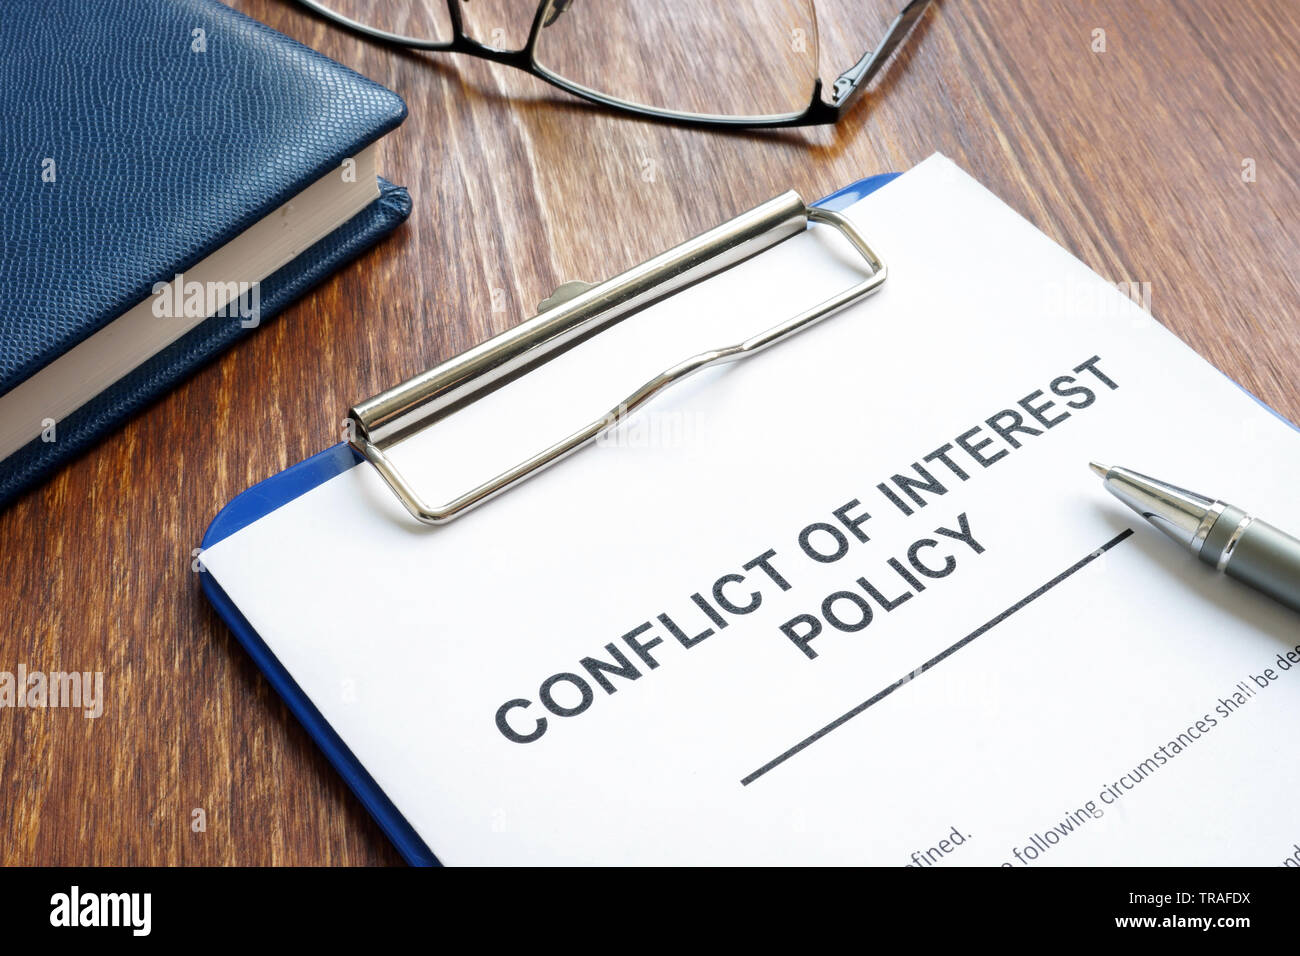 Conflict of interest policy and pen on a wooden surface. Stock Photo